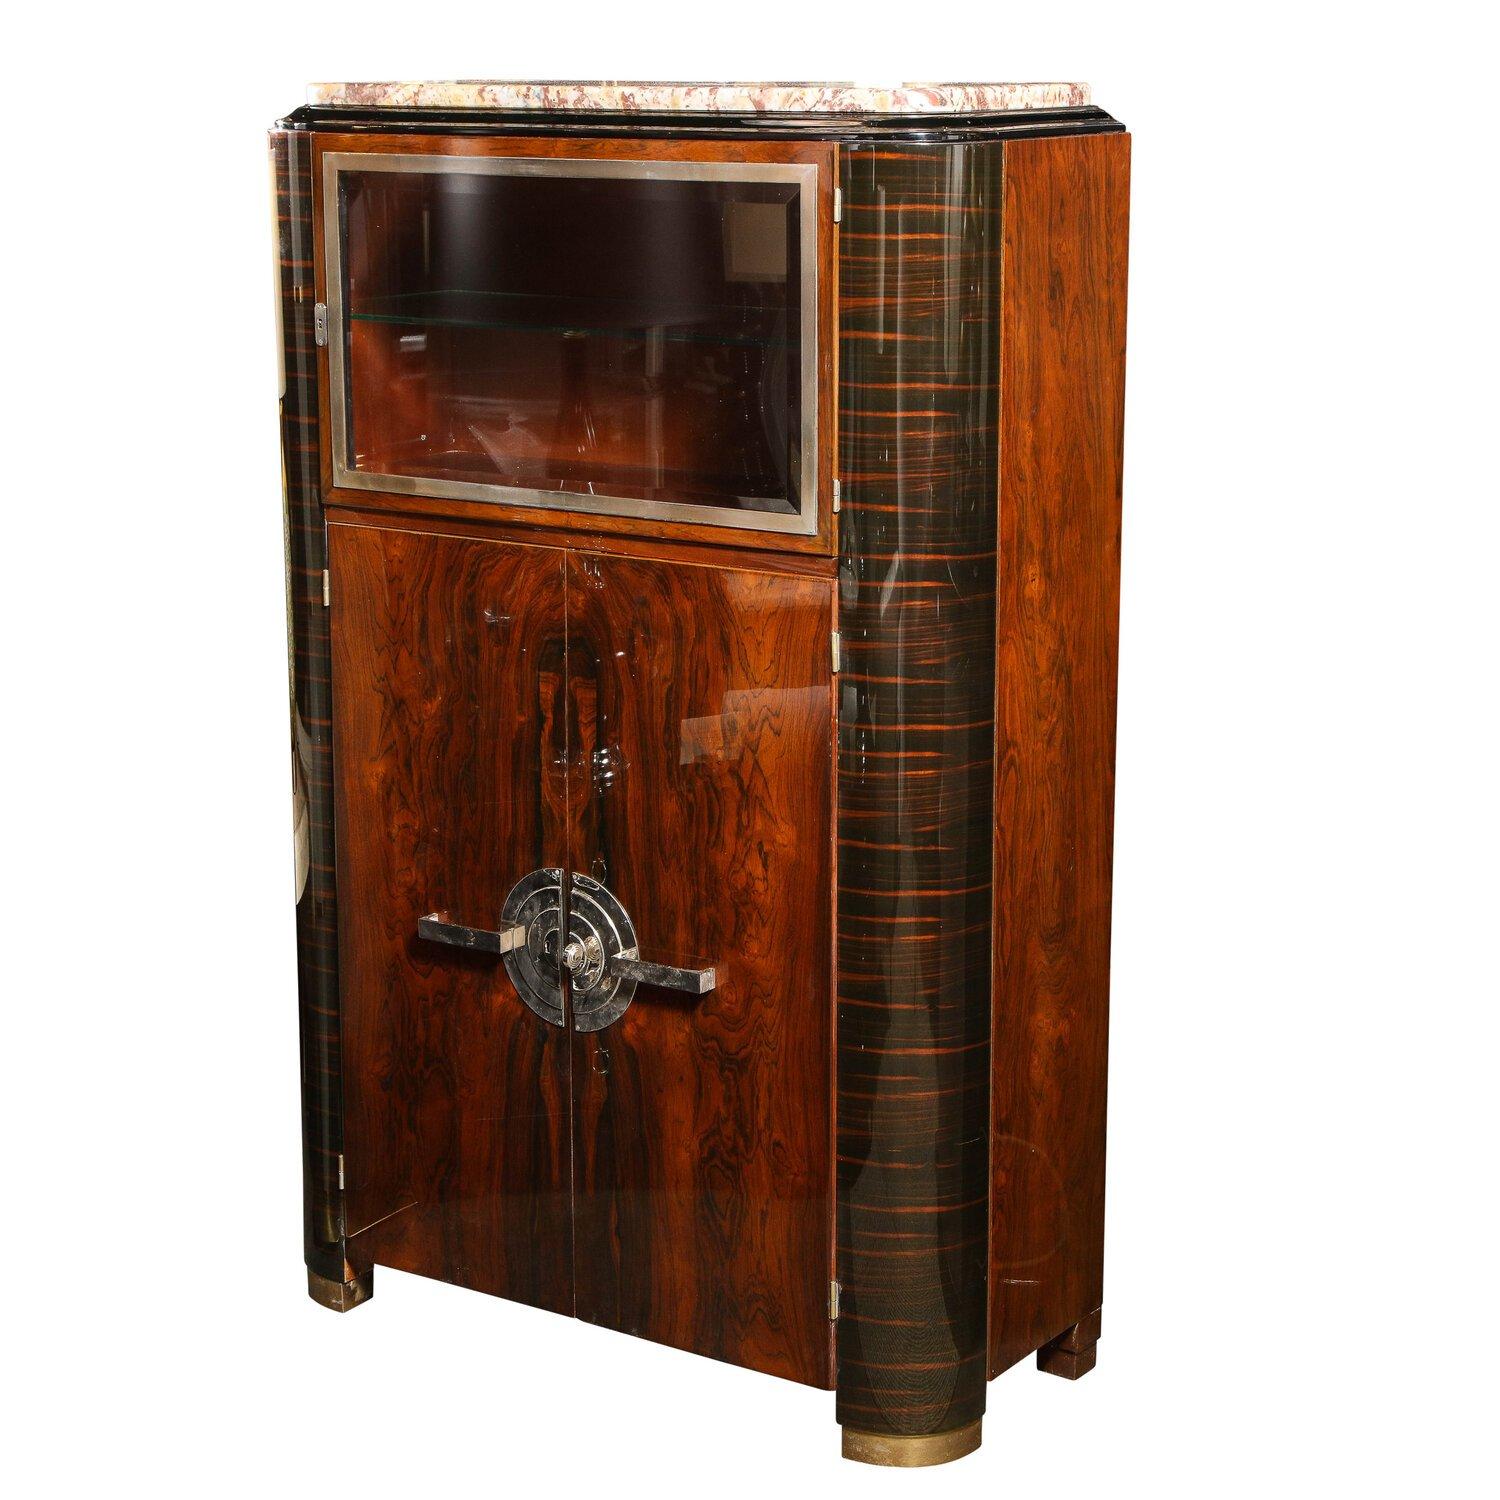 This illuminated cabinet in made of bookmatched rosewood, Macassar and mahogany woods with exotic marble top and polished nickel machine age pulls of concentric banded circles. The door features a hand beveled original glass door with glass shelf,